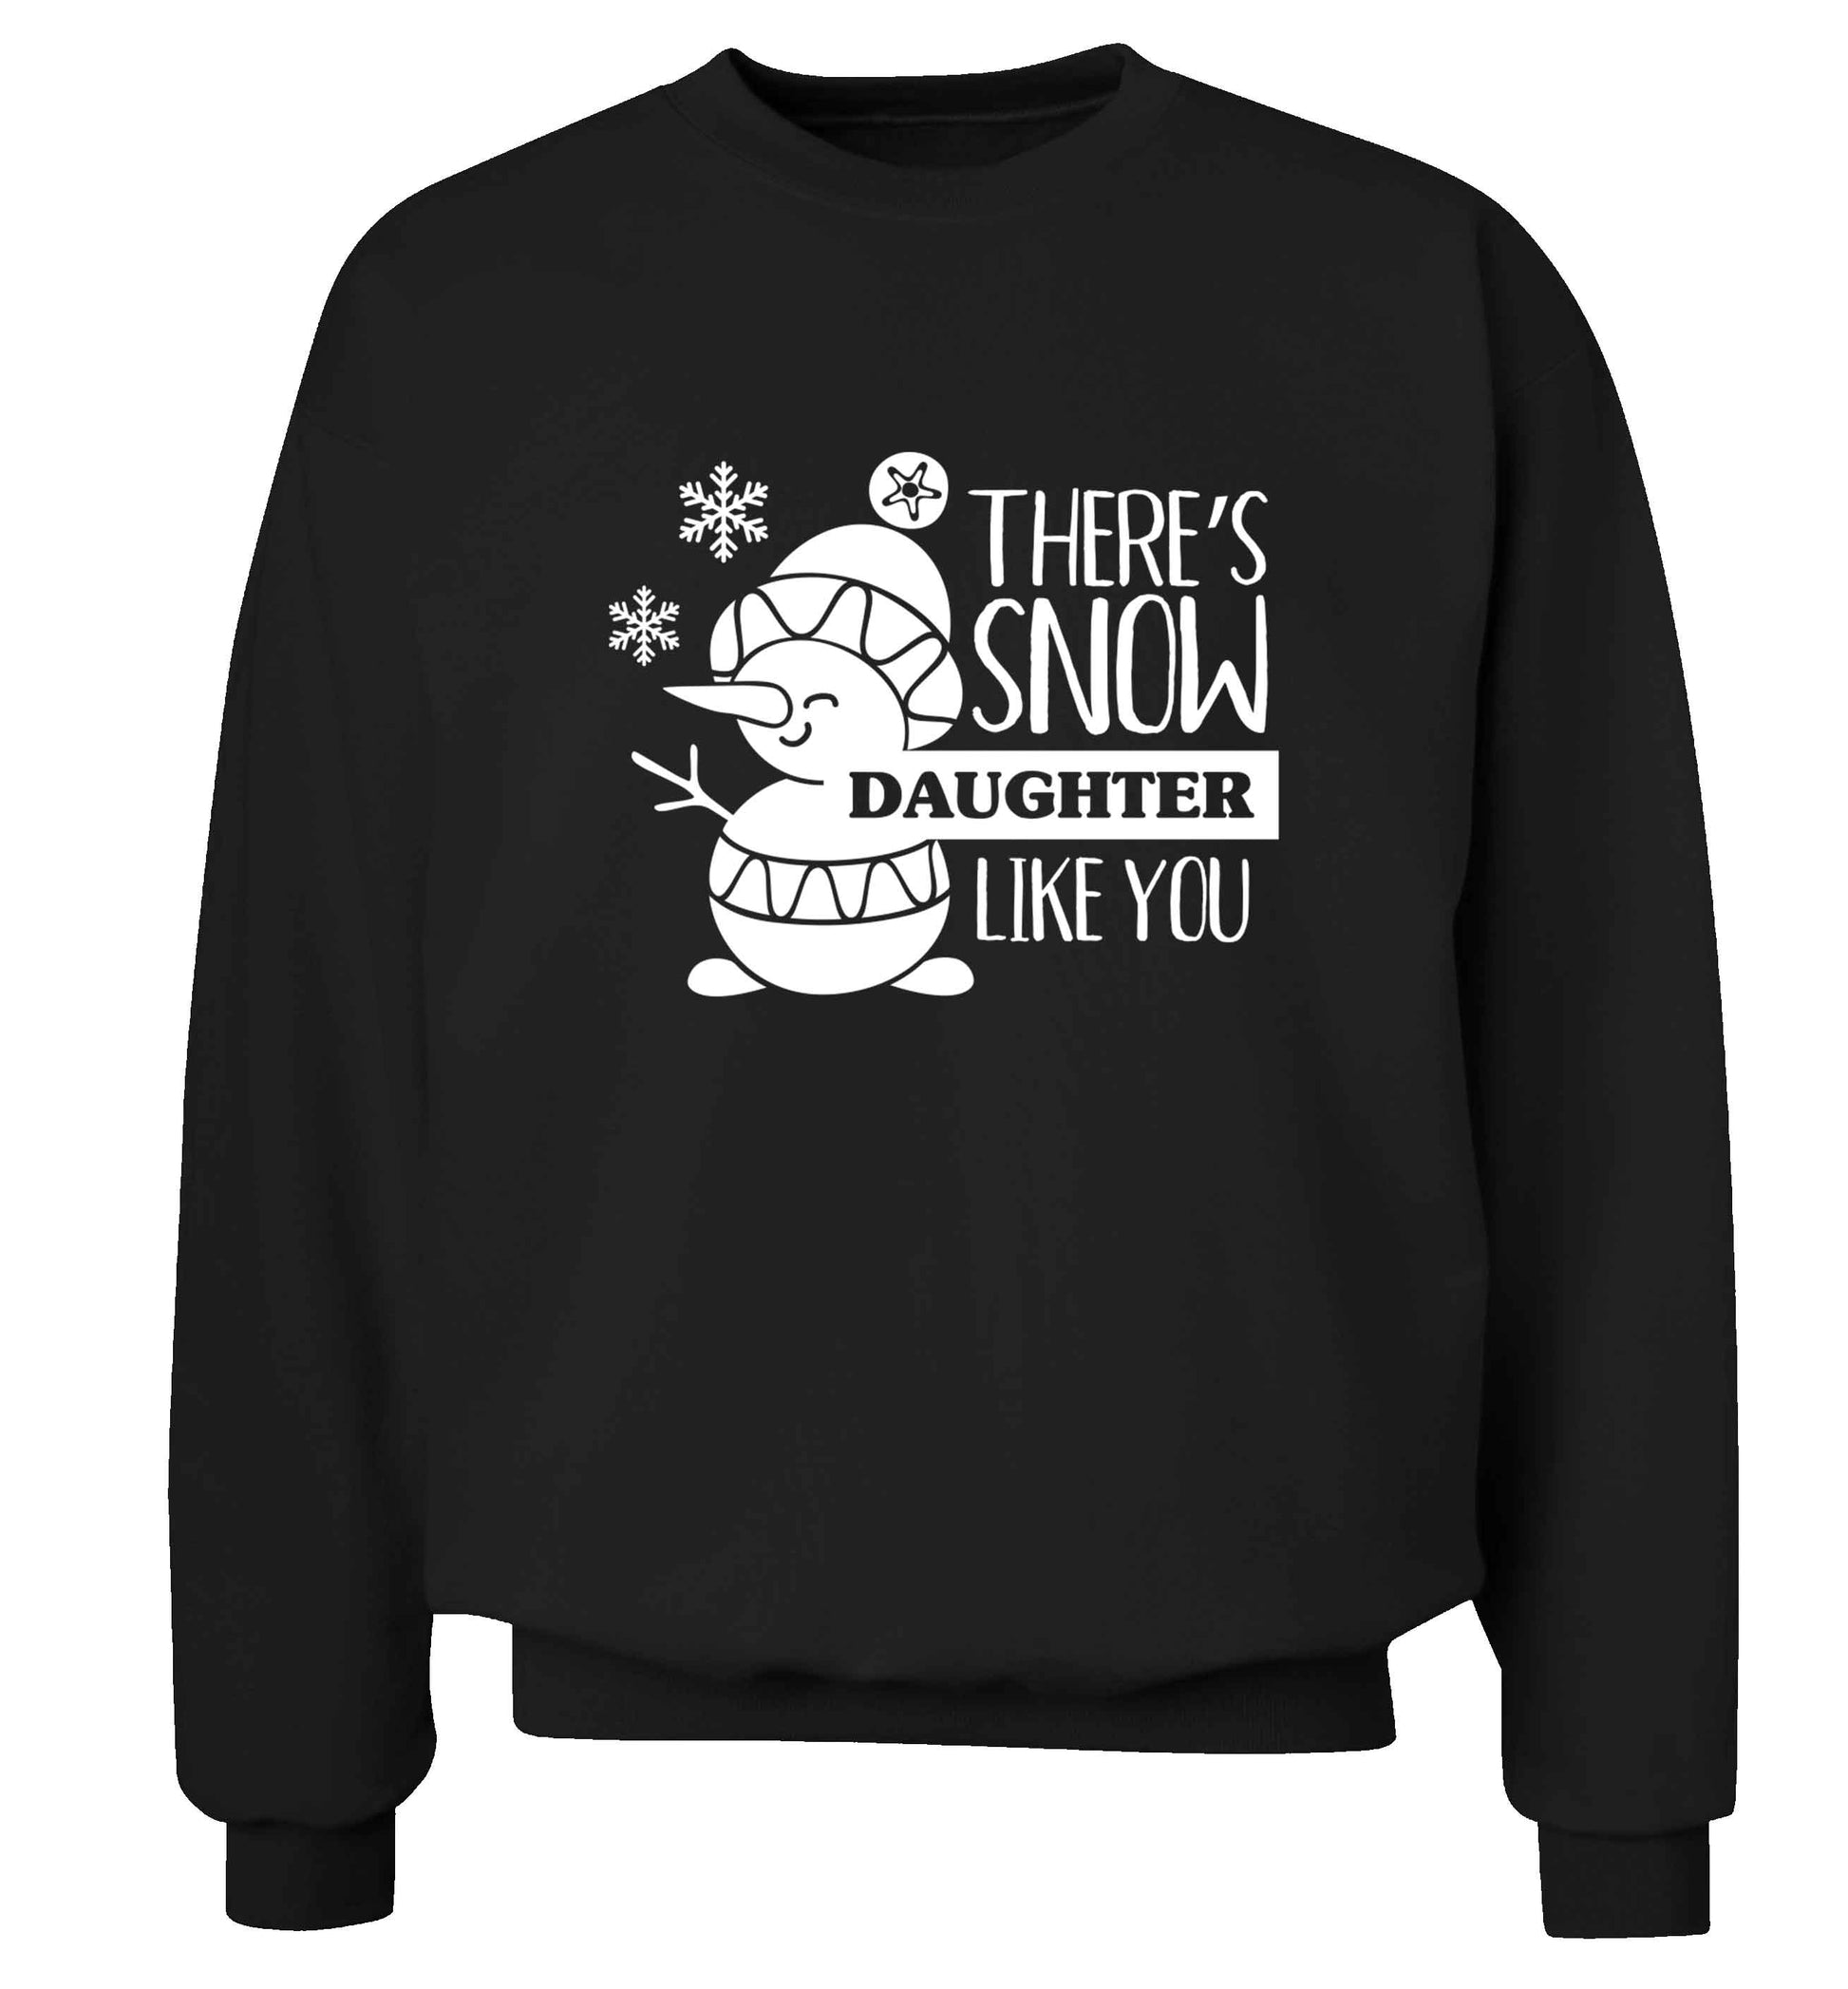 There's snow daughter like you adult's unisex black sweater 2XL